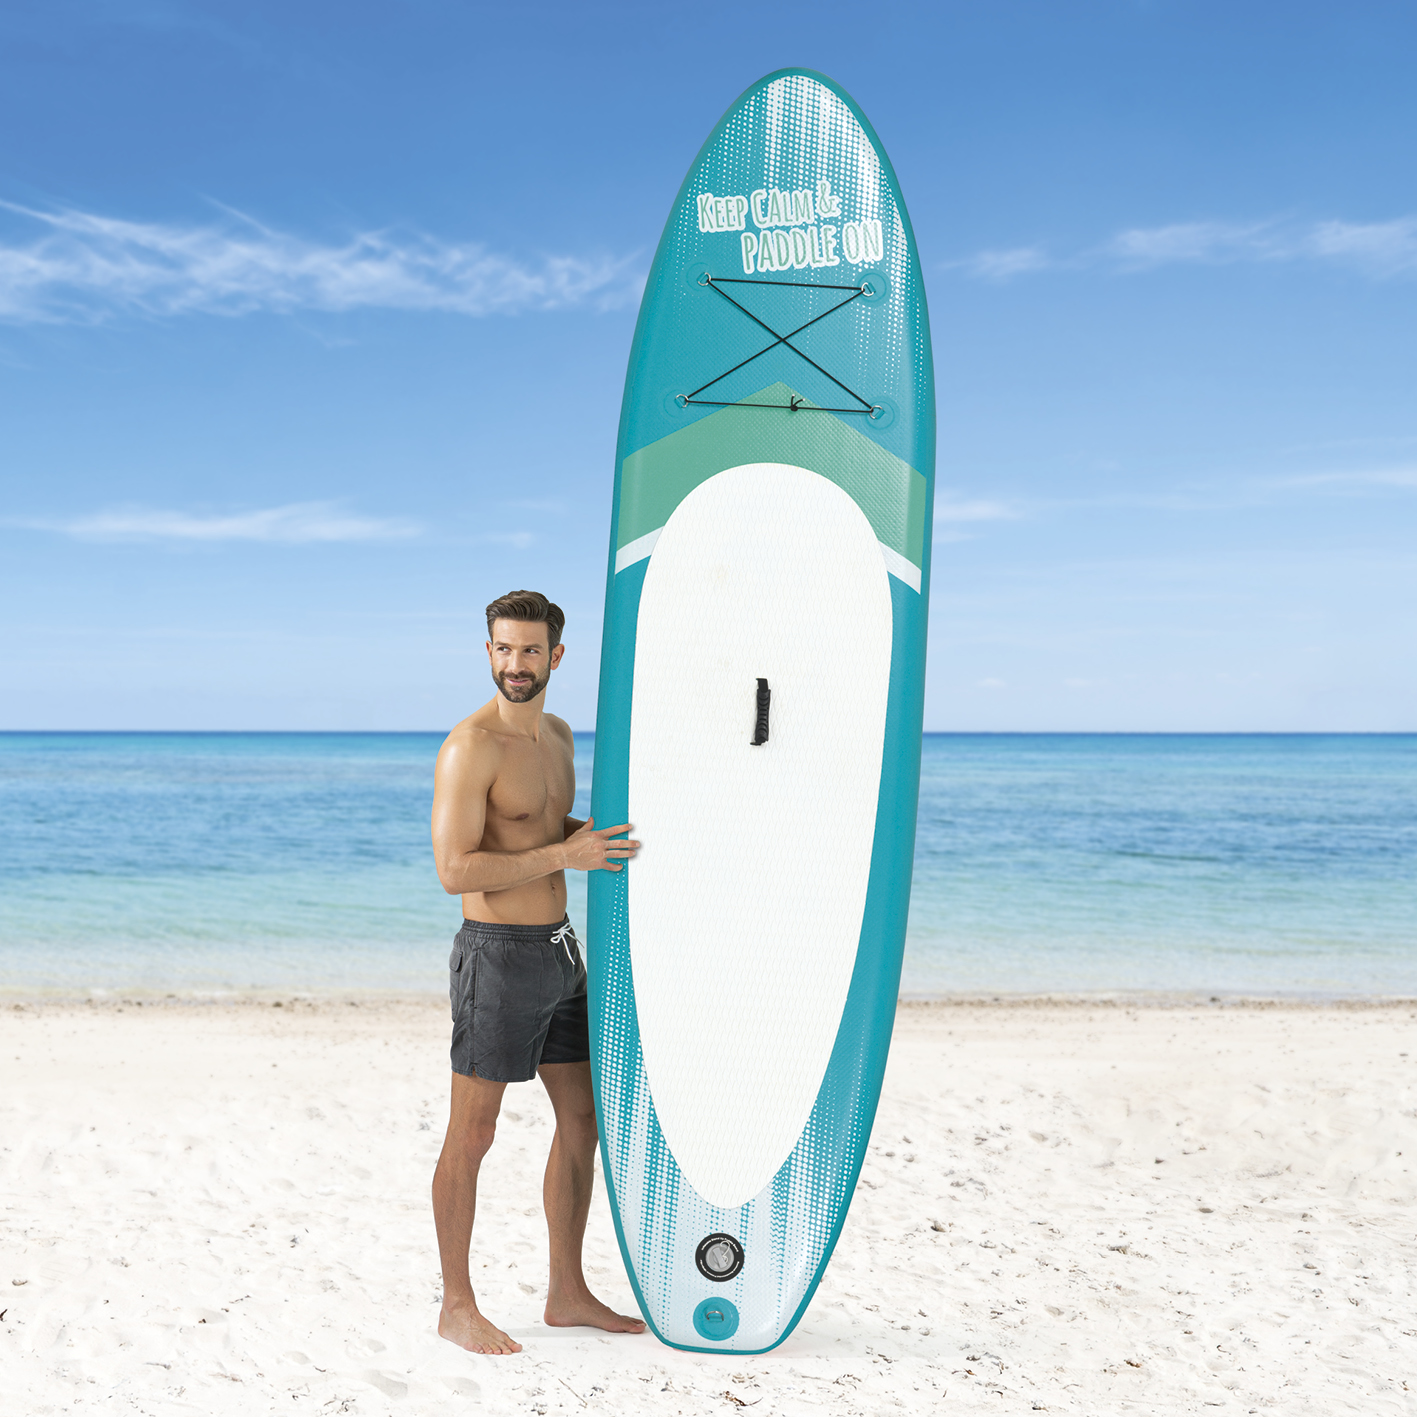 Paddle-Board, mehrfarbig MAXXMEE Stand-Up 06007